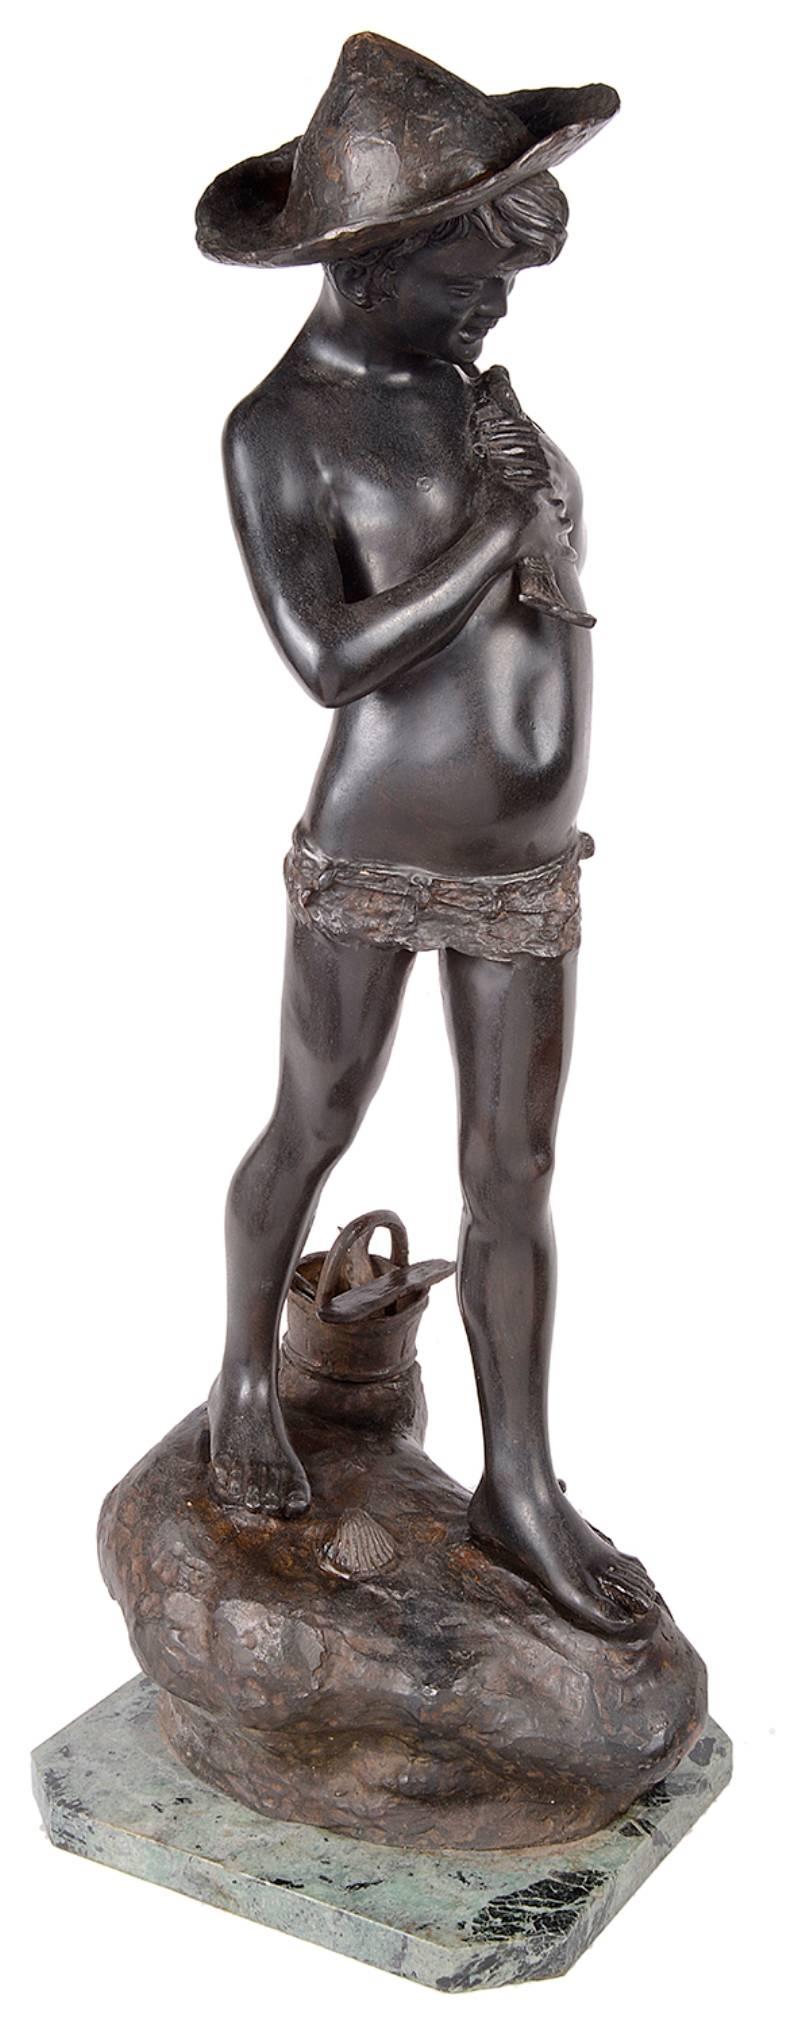 A good quality late 19th century bronze statue of a young boy fishing. Standing on a rocky out crop with a crab at his feet. Holding a fish and wearing a wide brimmed hat.